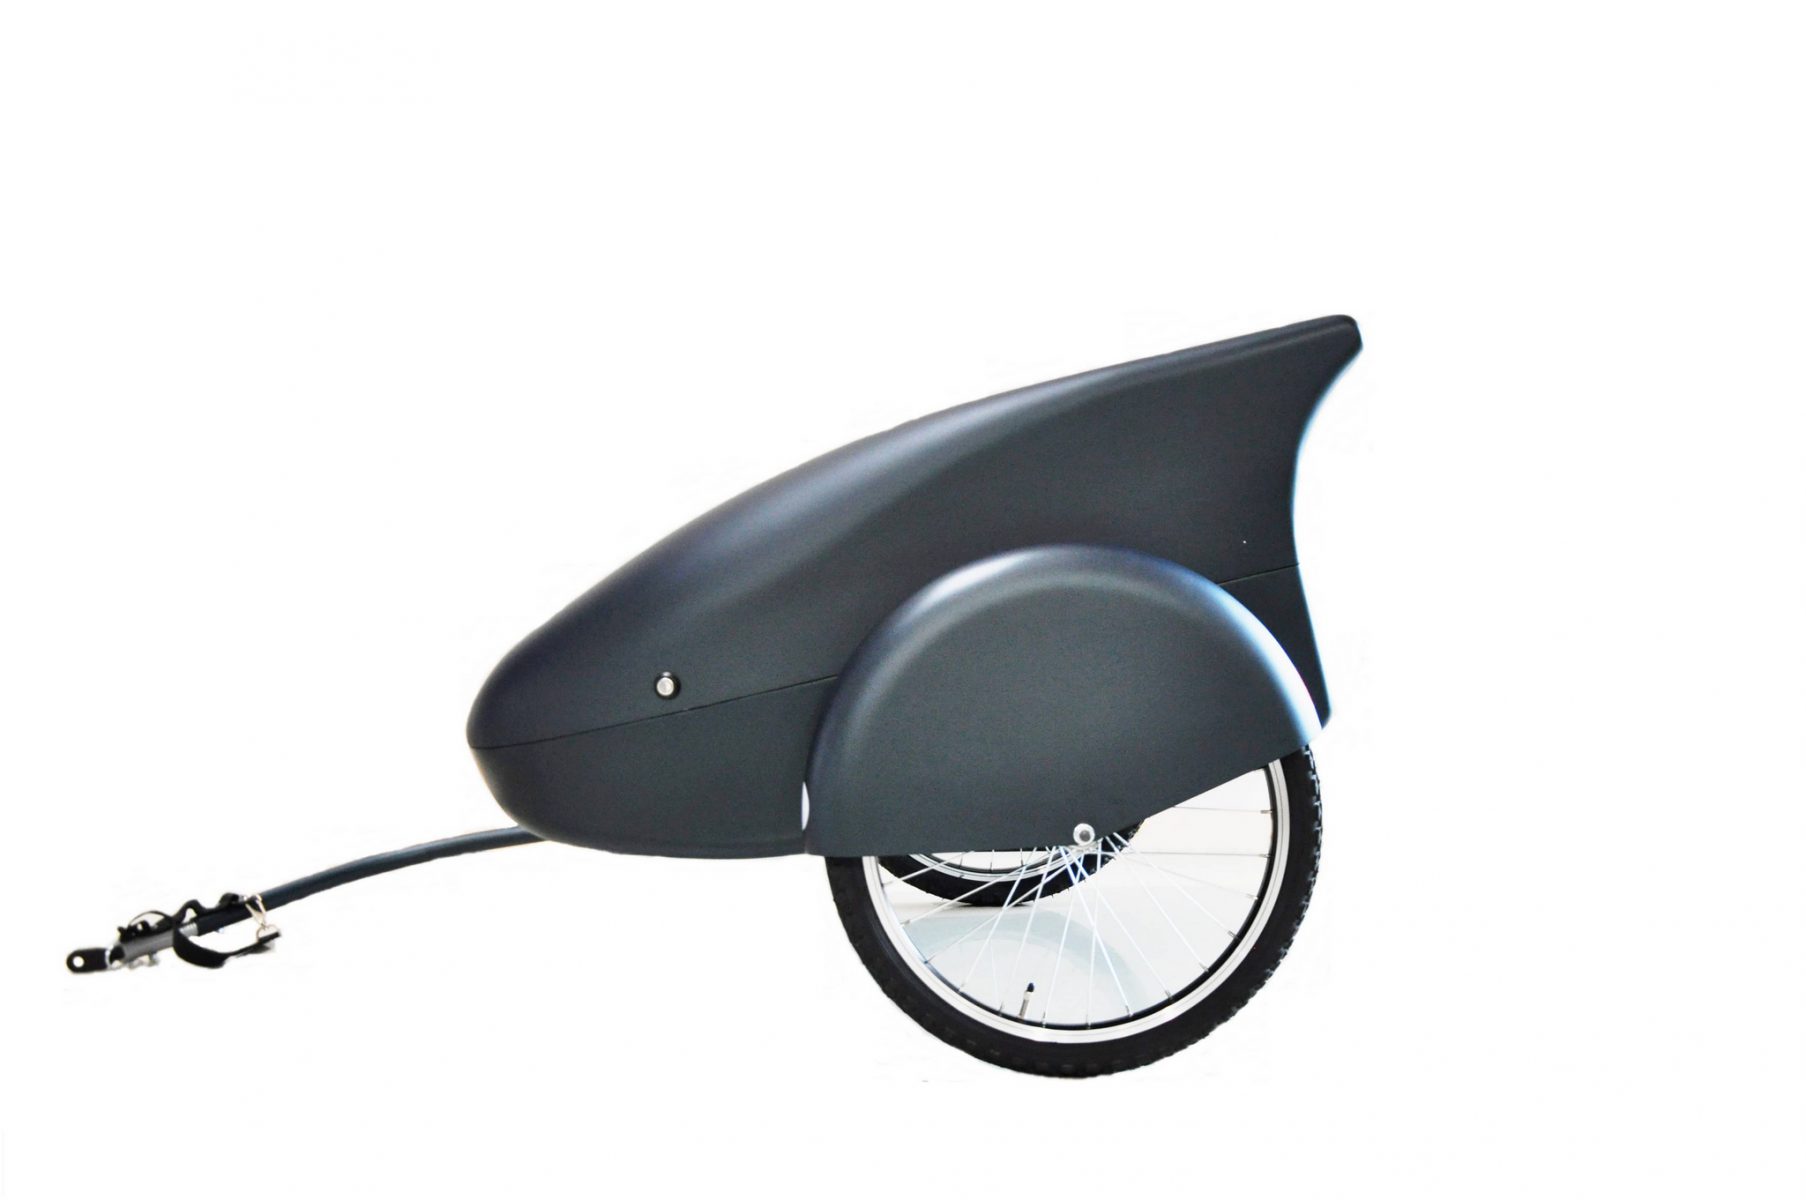 Carbon bicycle trailer